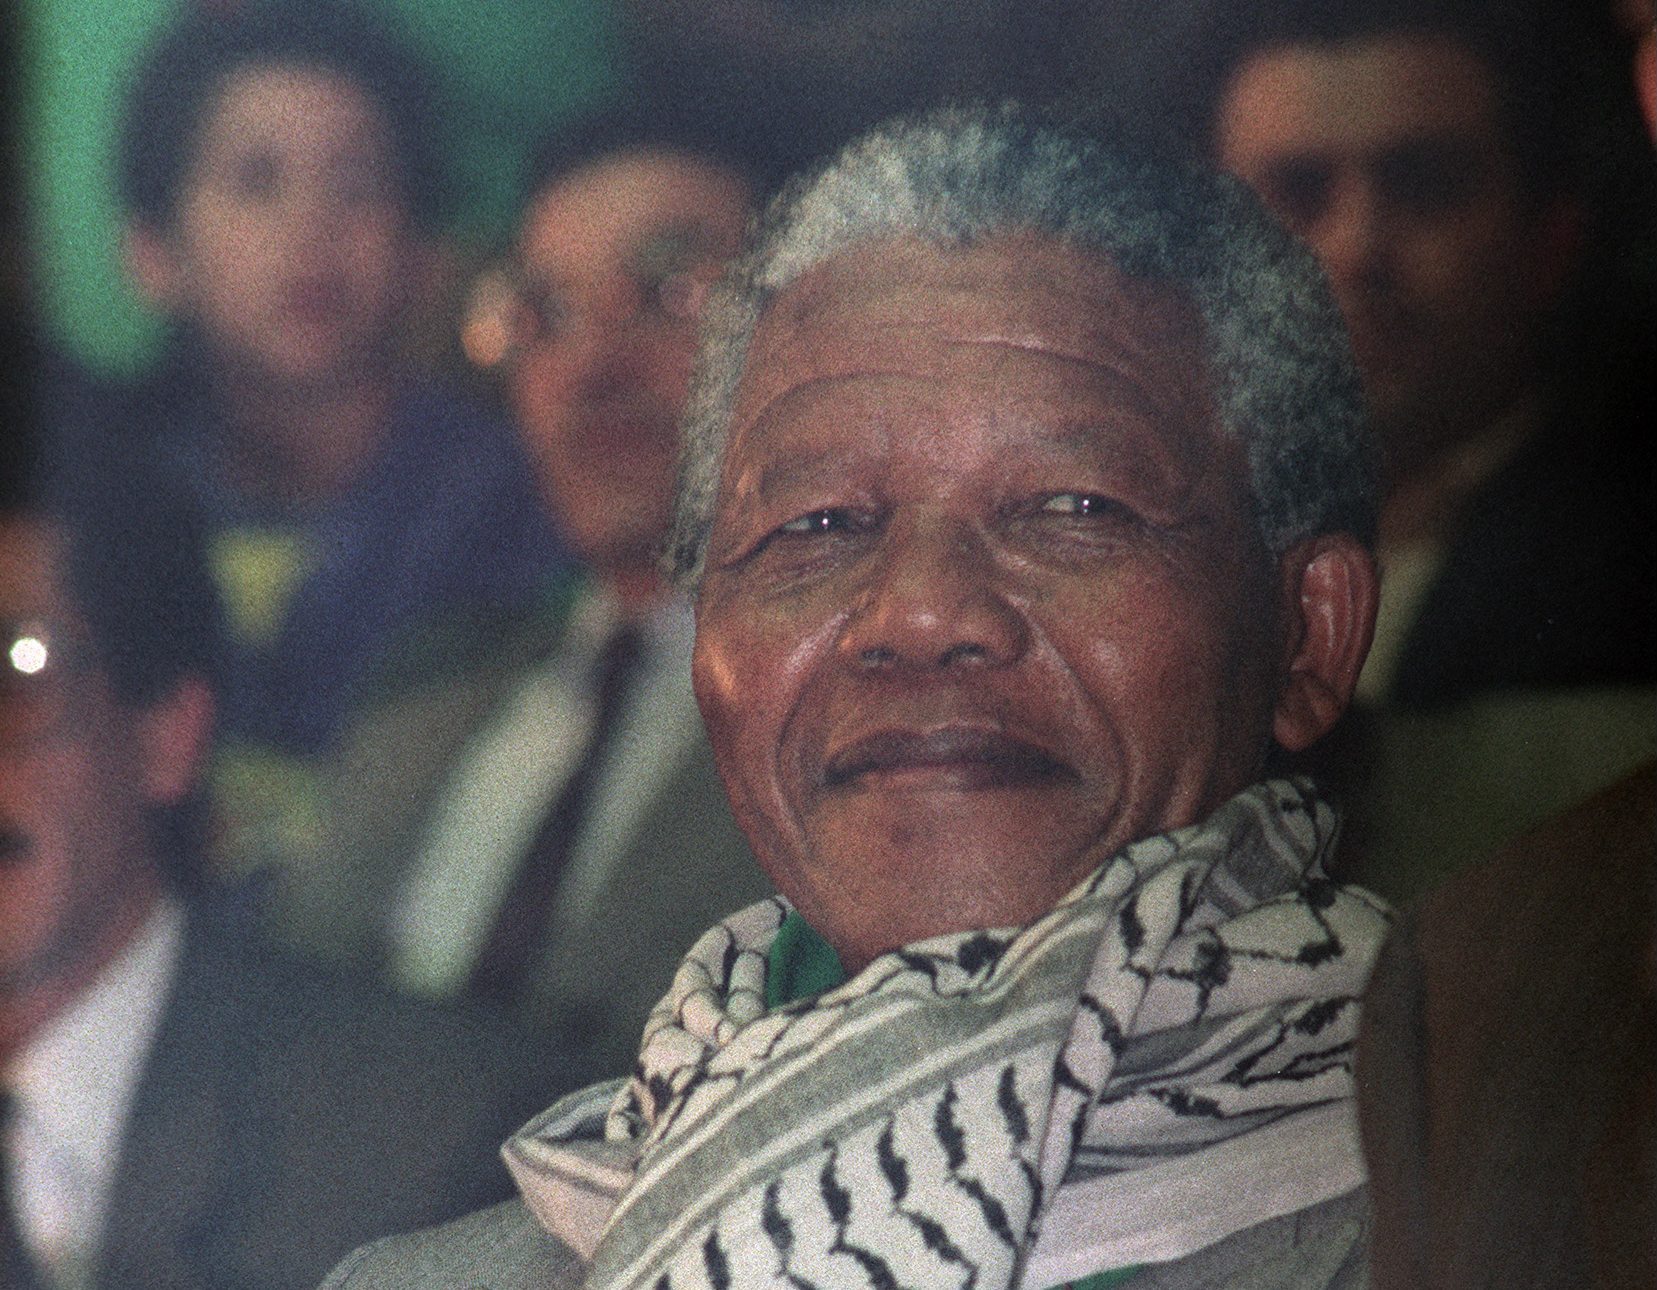 Unpack the past: Mandela, the keffiyeh and South Africa’s Palestine embrace | Features #Unpack #Mandela #keffiyeh #South #Africas #Palestine #embrace #Features